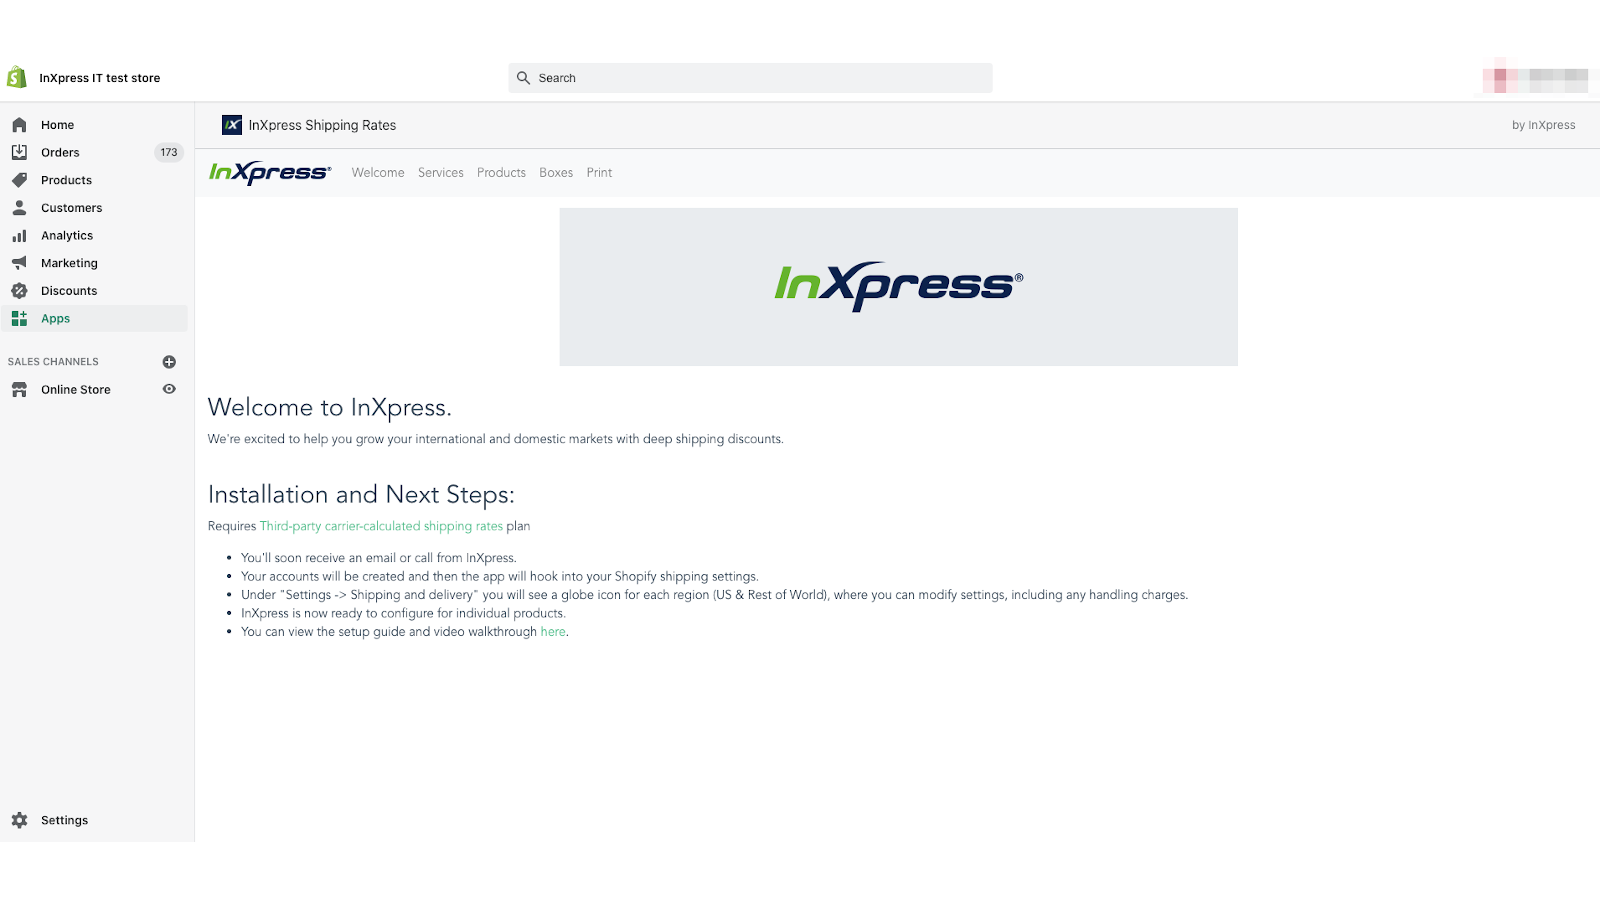 InXpress Welcome screen